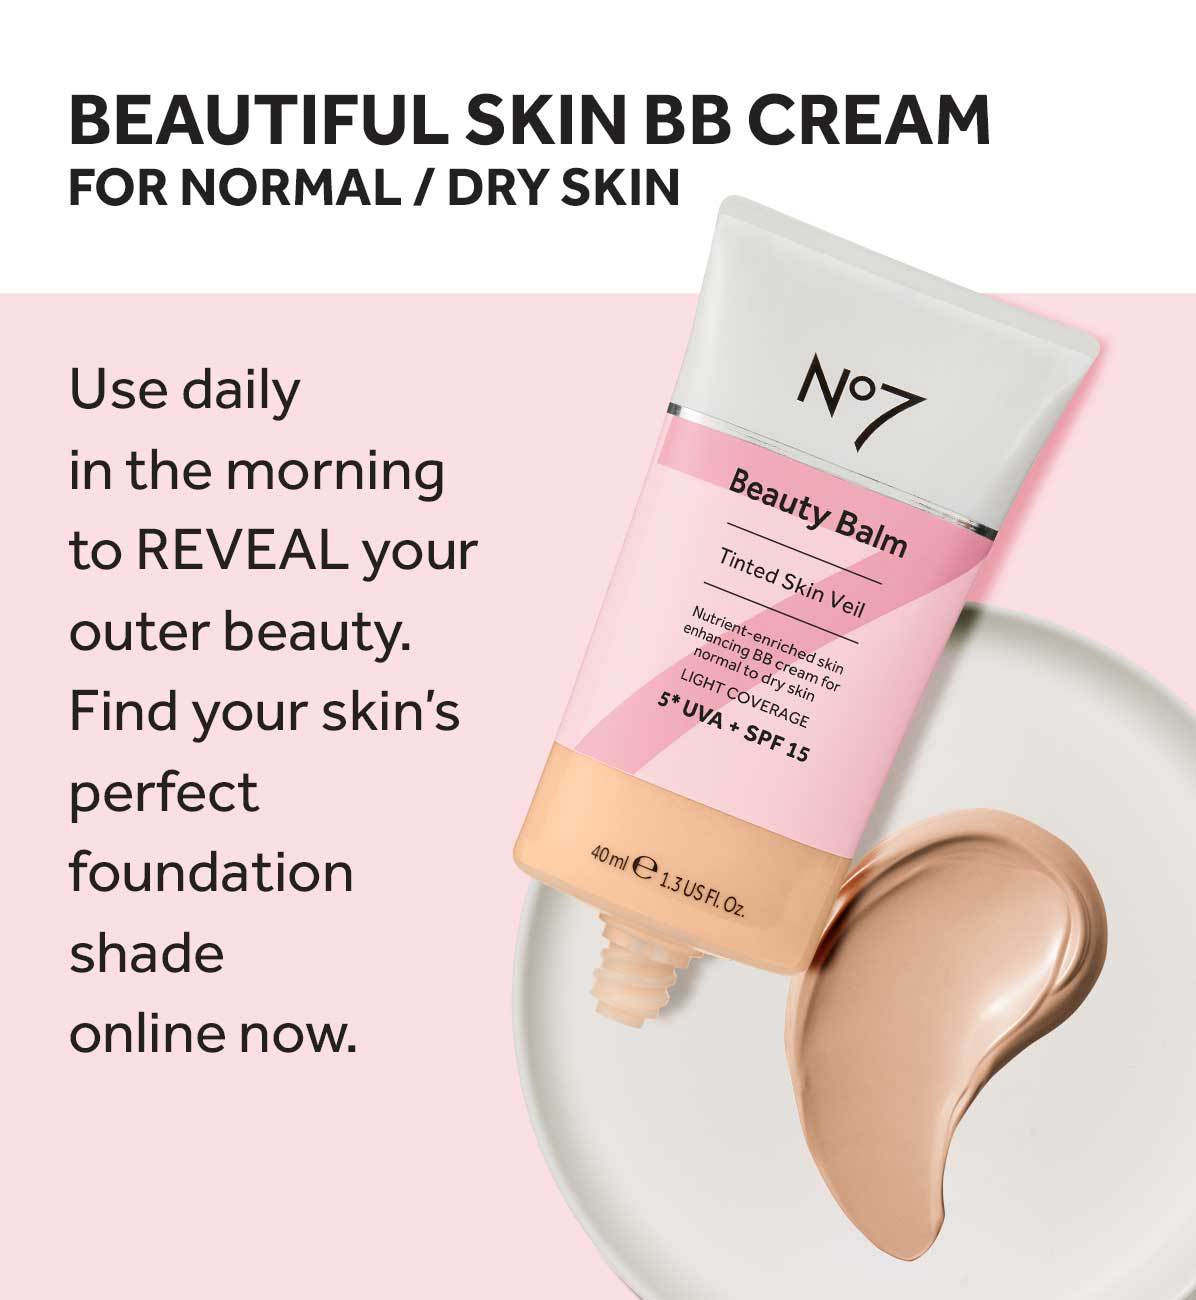 BEAUTIFUL SKIN BB CREAM FOR NORMAL/DRY SKIN Use daily in the morning to REVEAL your outer beauty. Find your skin's perfect foundation shade online now. N°7 Beauty Balm Tinted Skin Veil Nutrient-enriched skin enhancing BB cream for normal to dry skin LIGHT COVERAGE 5* UVA + SPF 15 40 ml 1.3 US Fl. Oz..